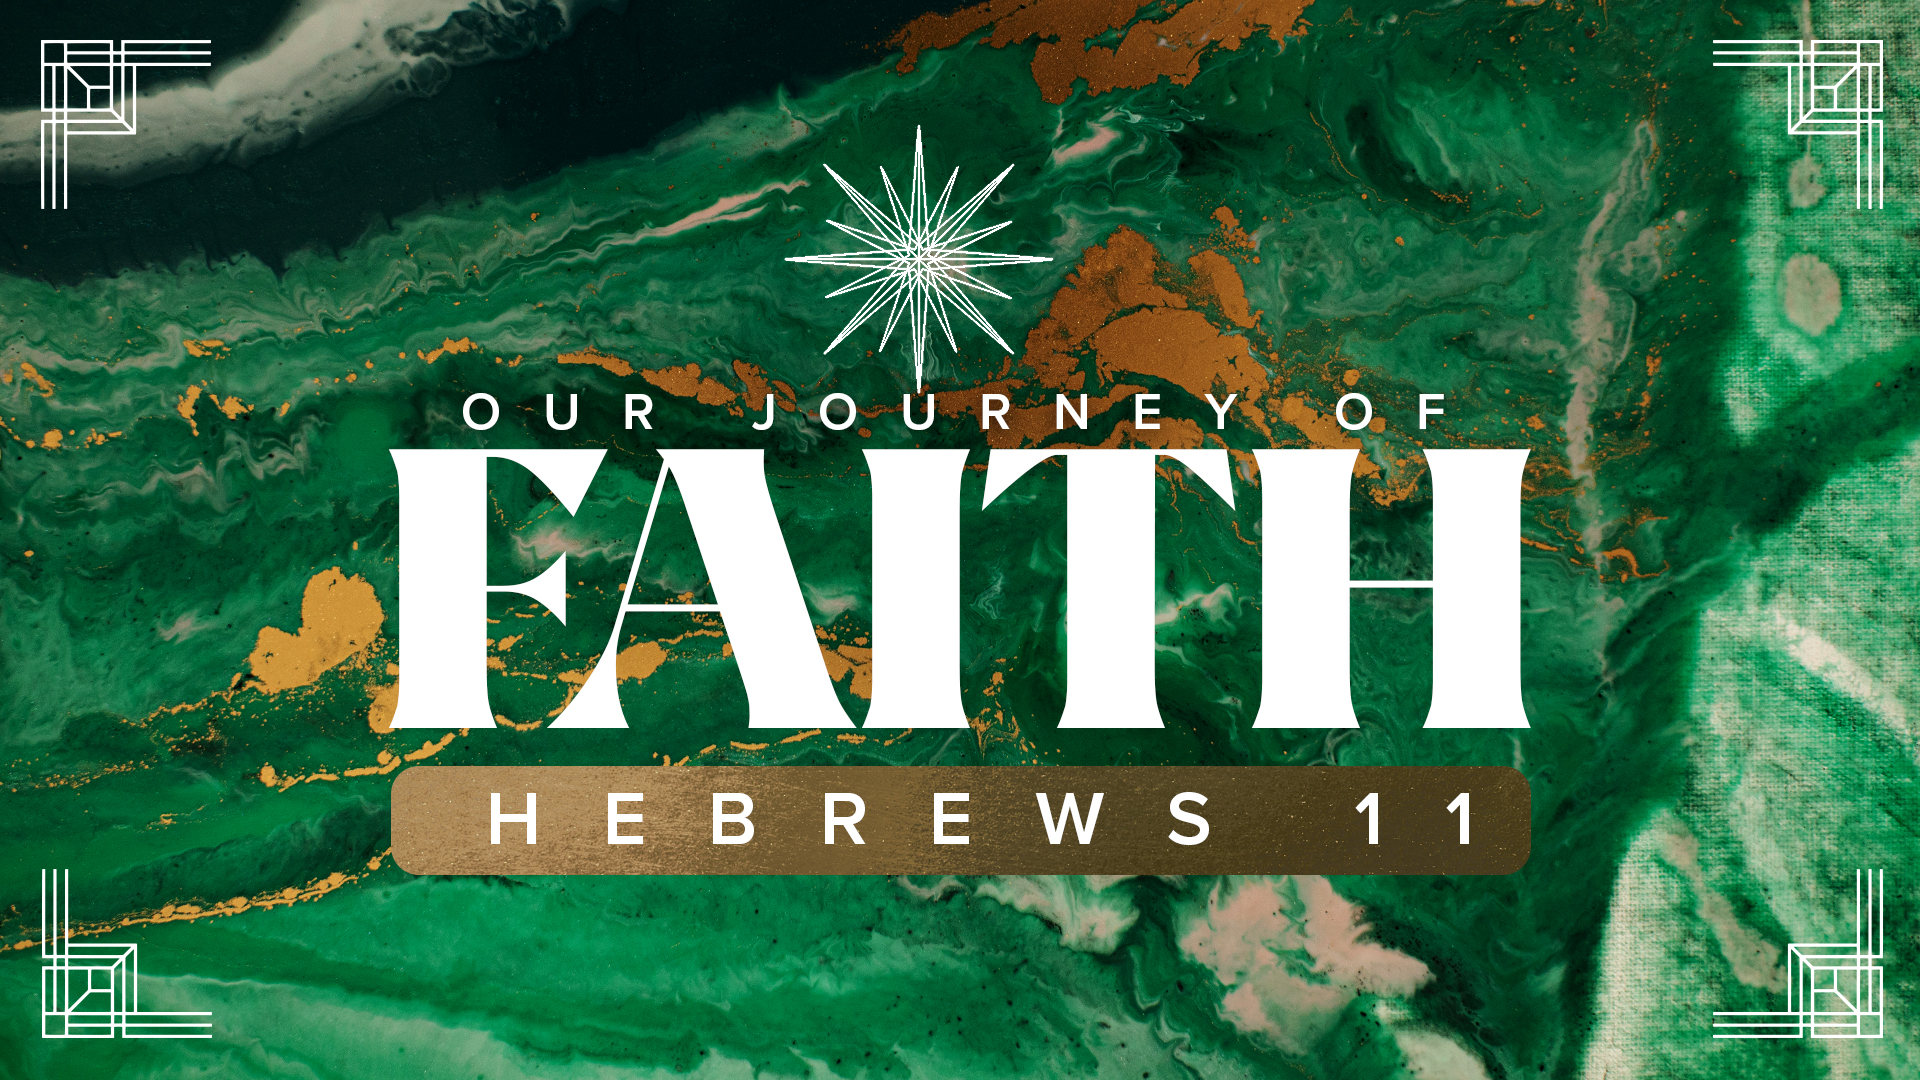 Hebrews 11:20-22 People of Hope and Blessing (Hebrews 11: Our Journey of Faith)